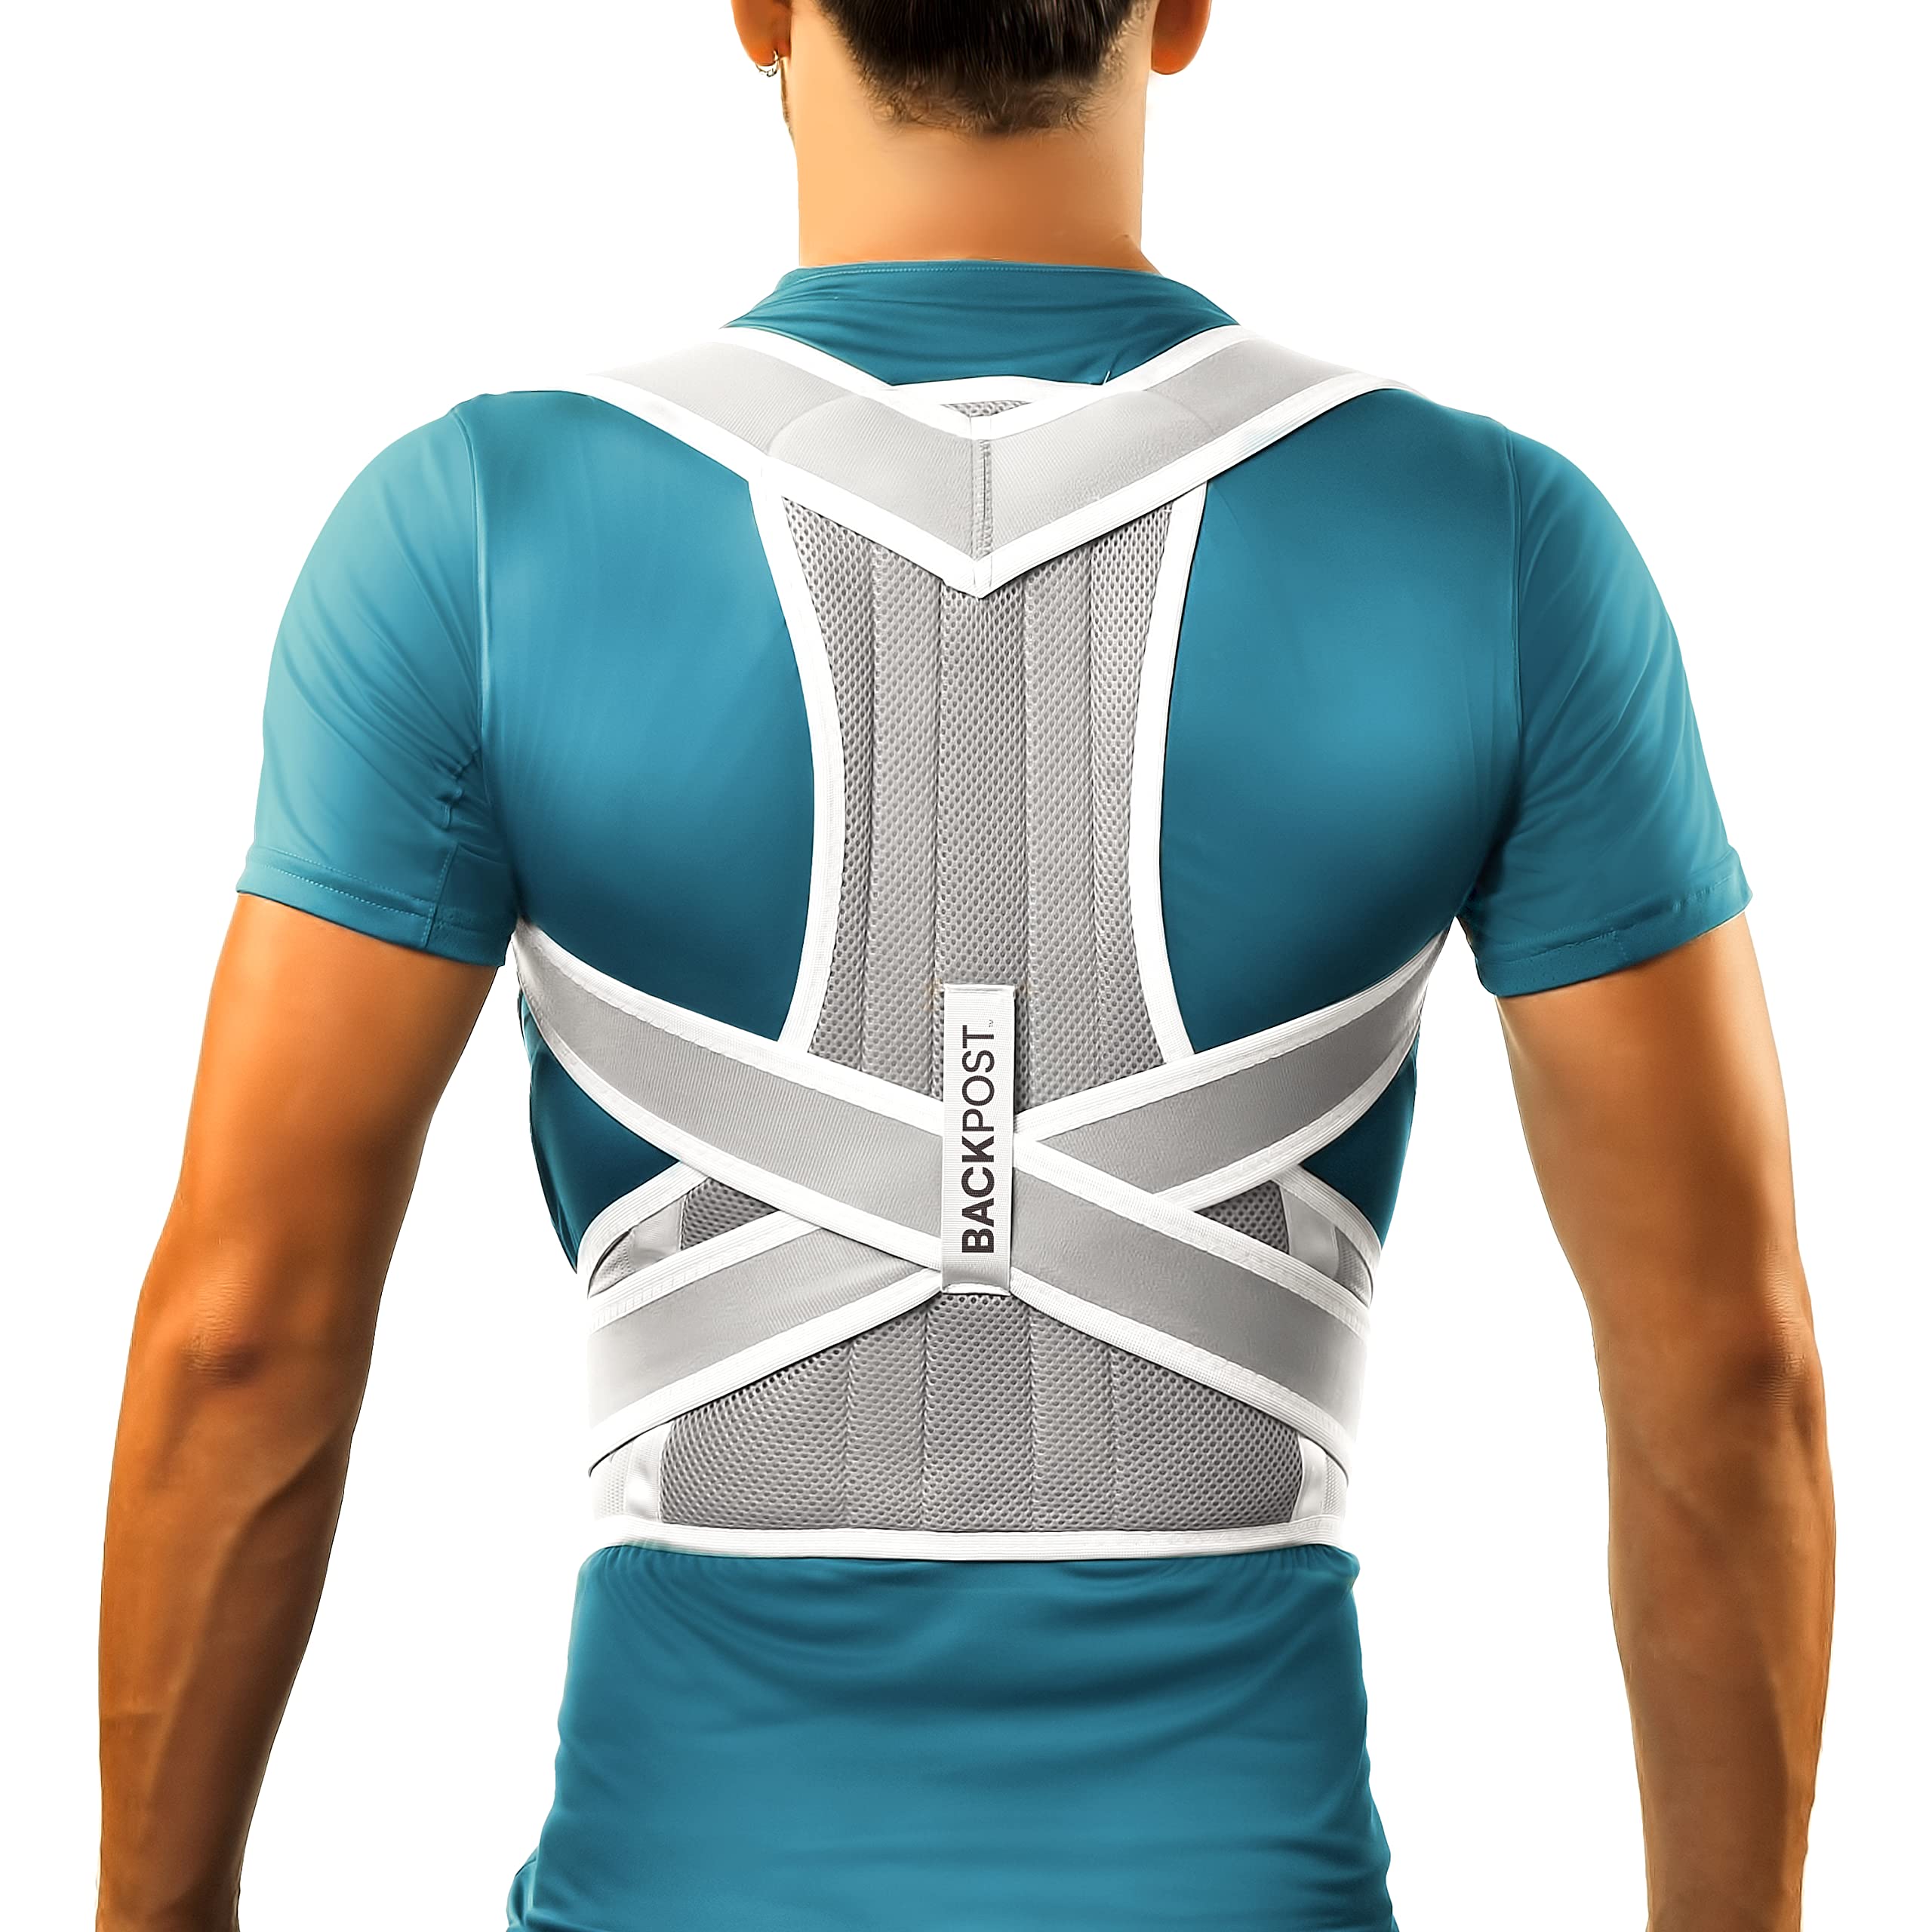 Posture Corrector Lower Back Pain Relief Lumbar Brace Support